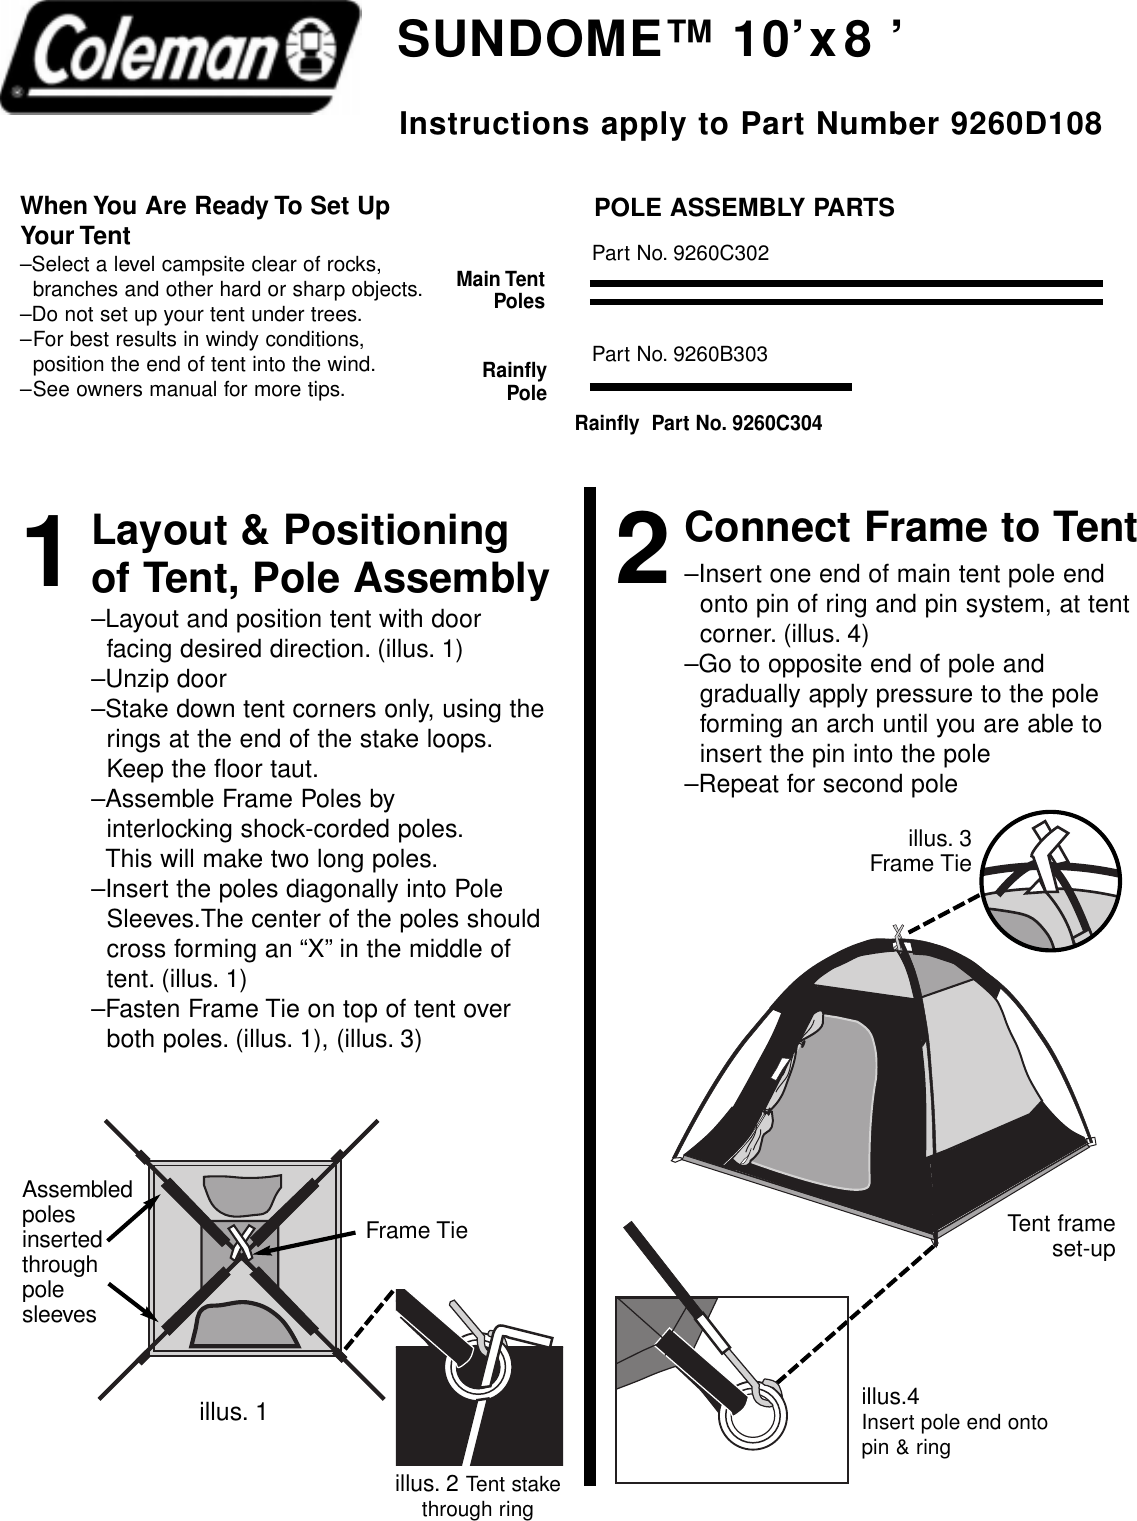 Page 1 of 2 - Coleman Coleman-9260D108-Users-Manual- 9260D108 Sundome 10x8 Tent  Coleman-9260d108-users-manual